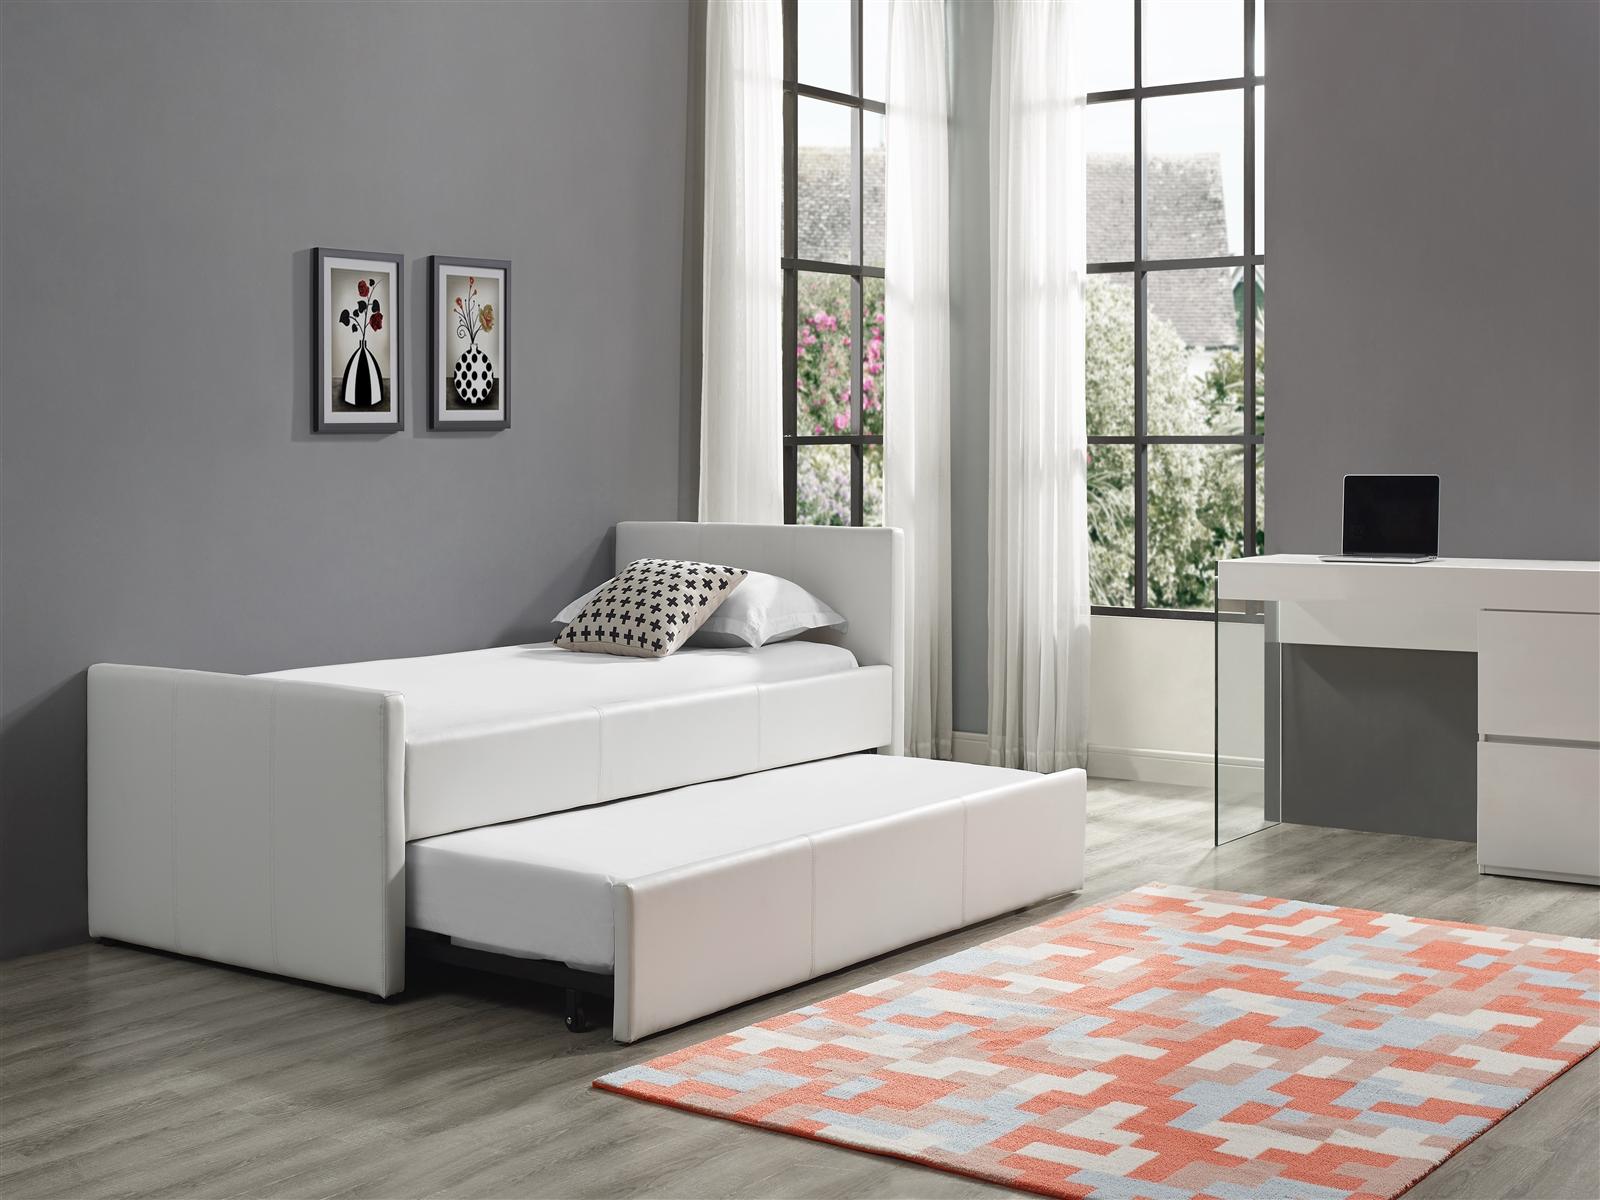 Contemporary, Modern Storage Bed DUETTE CB-14BD-XLTWIN in White Eco-Leather